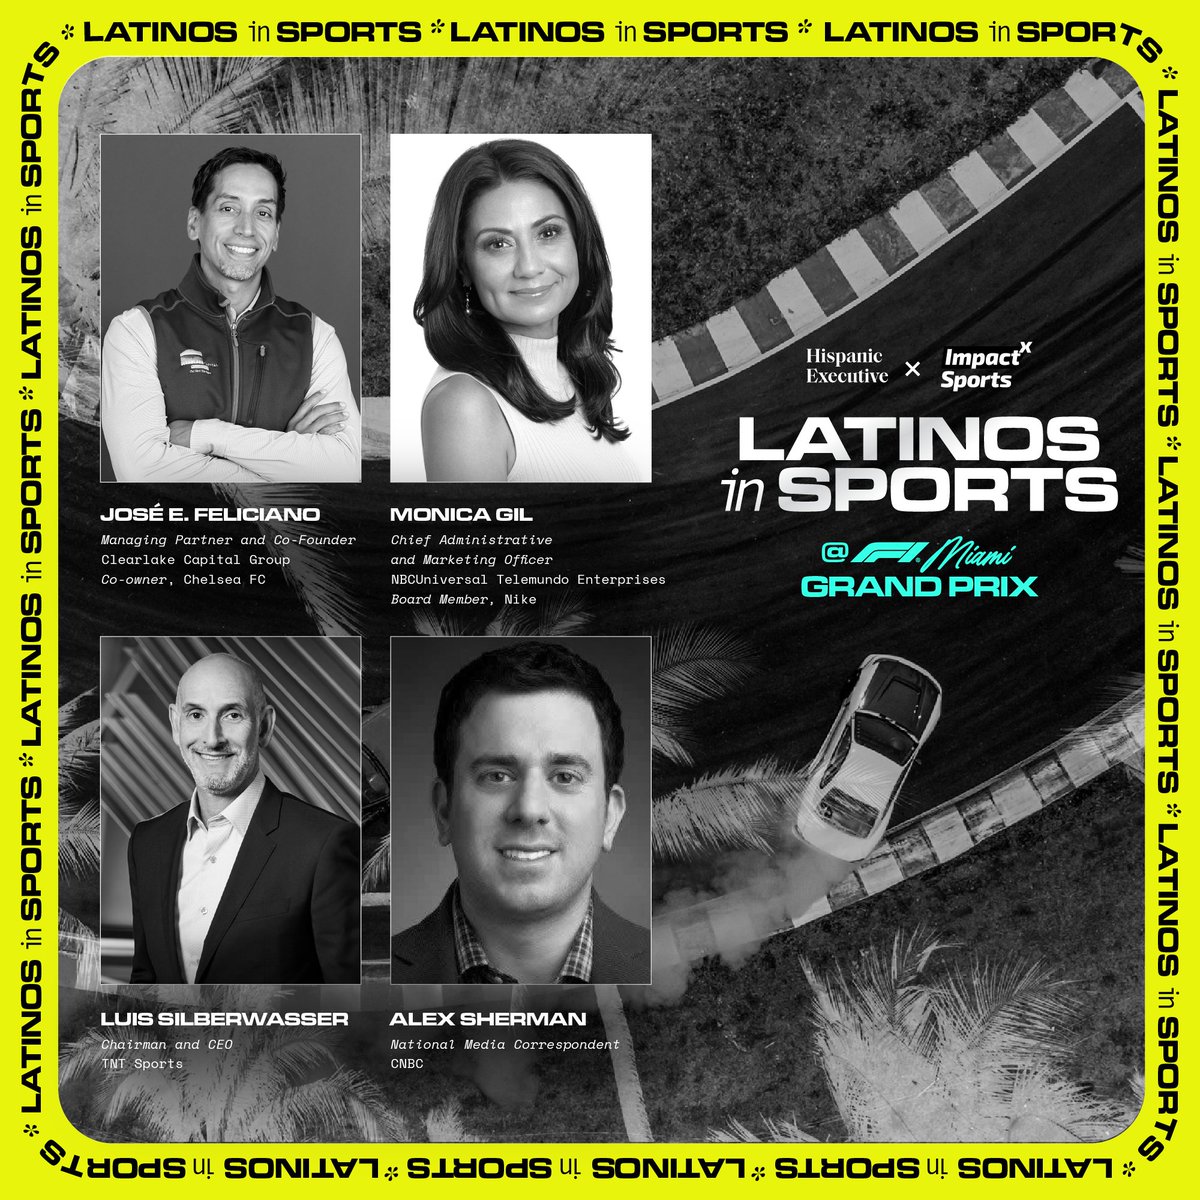 The 3 Honorees at the Latinos in Sports F1 Event TONIGHT: latinosinsports.com/latinos-in-spo… #LatinosInSports #MiamiGP